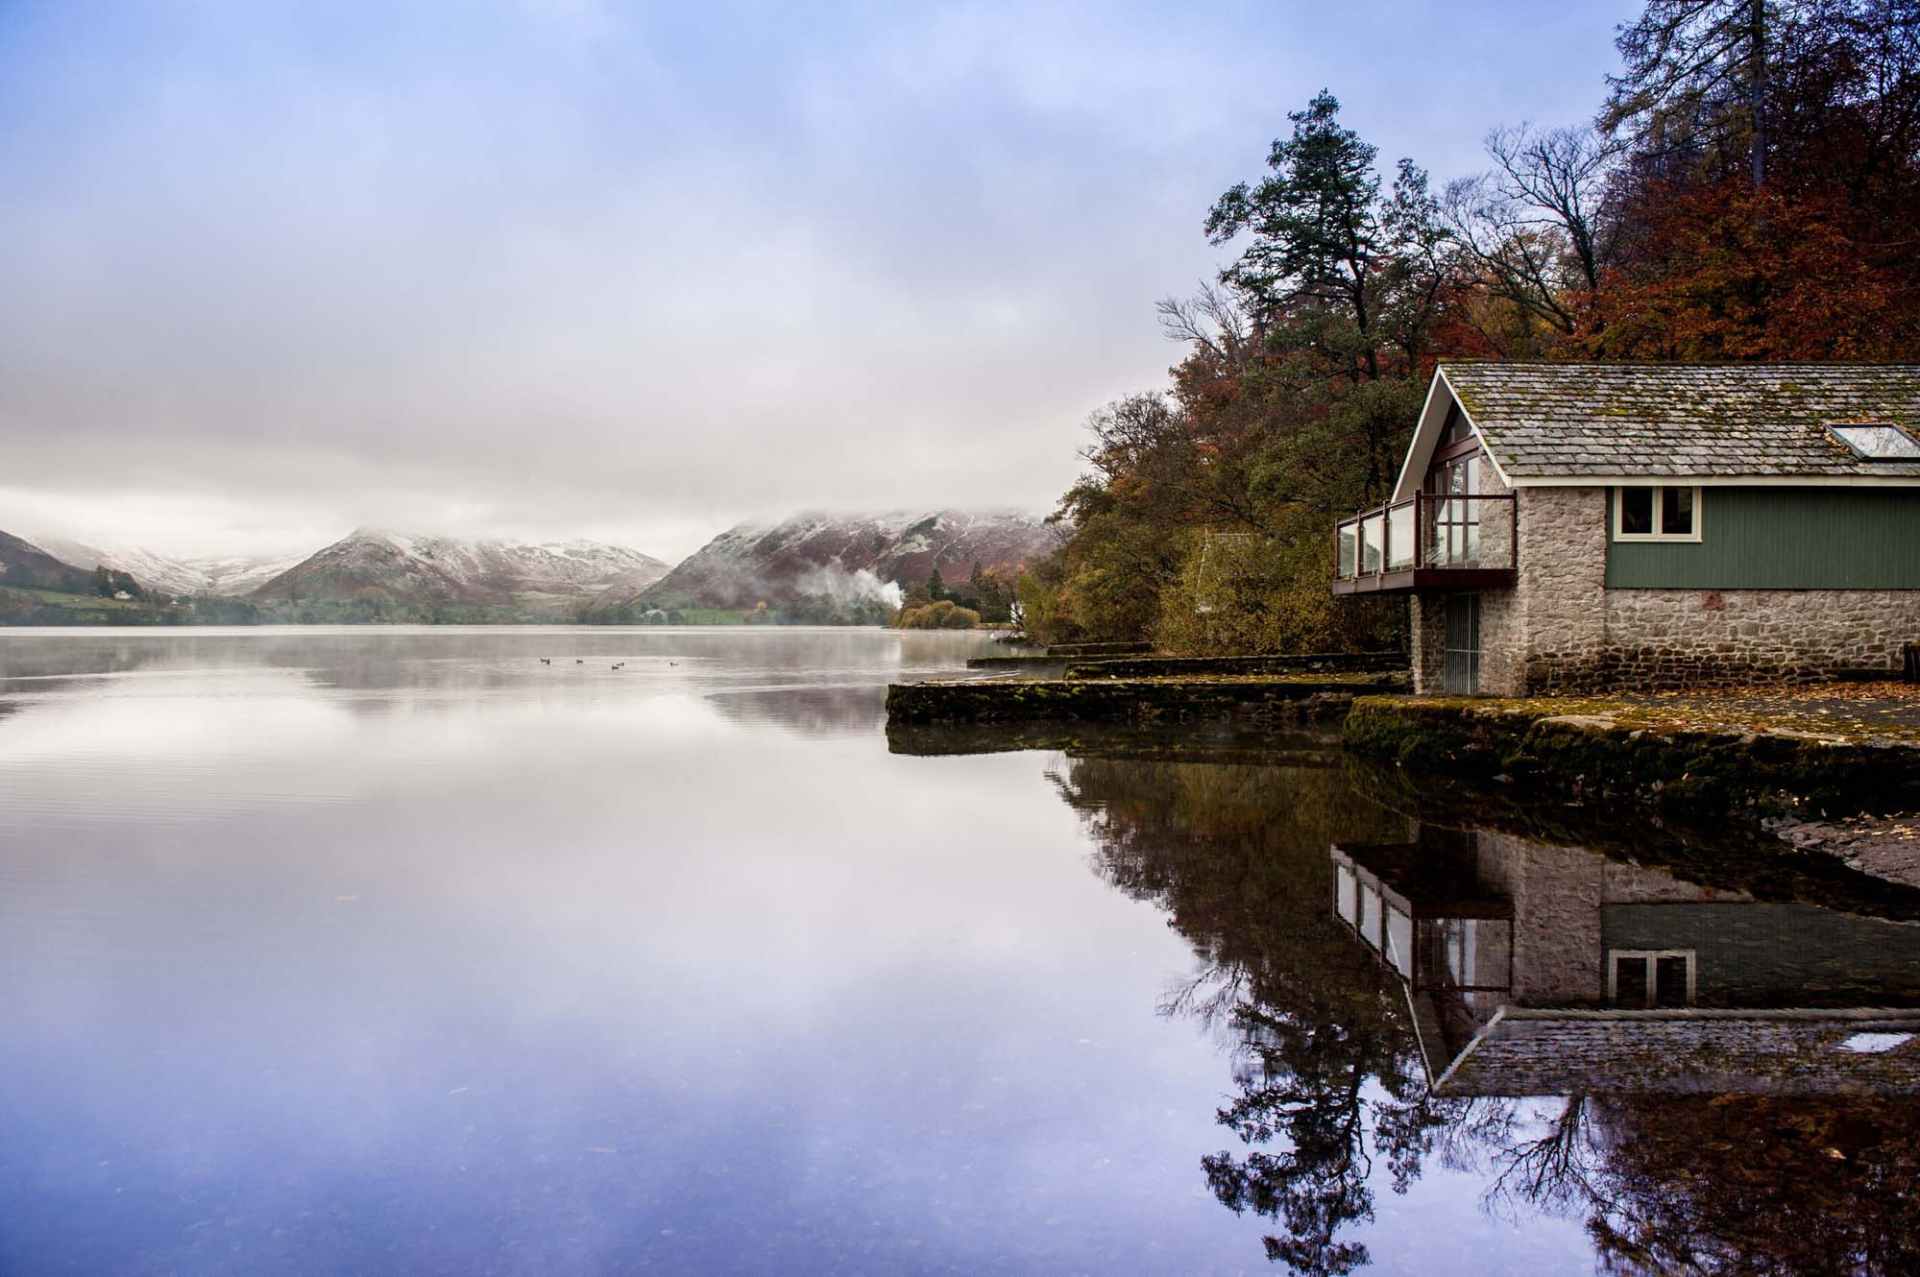 ullswater-far-boathouse-cabin-on-lake-at-sunrise-airbnbs-lake-district